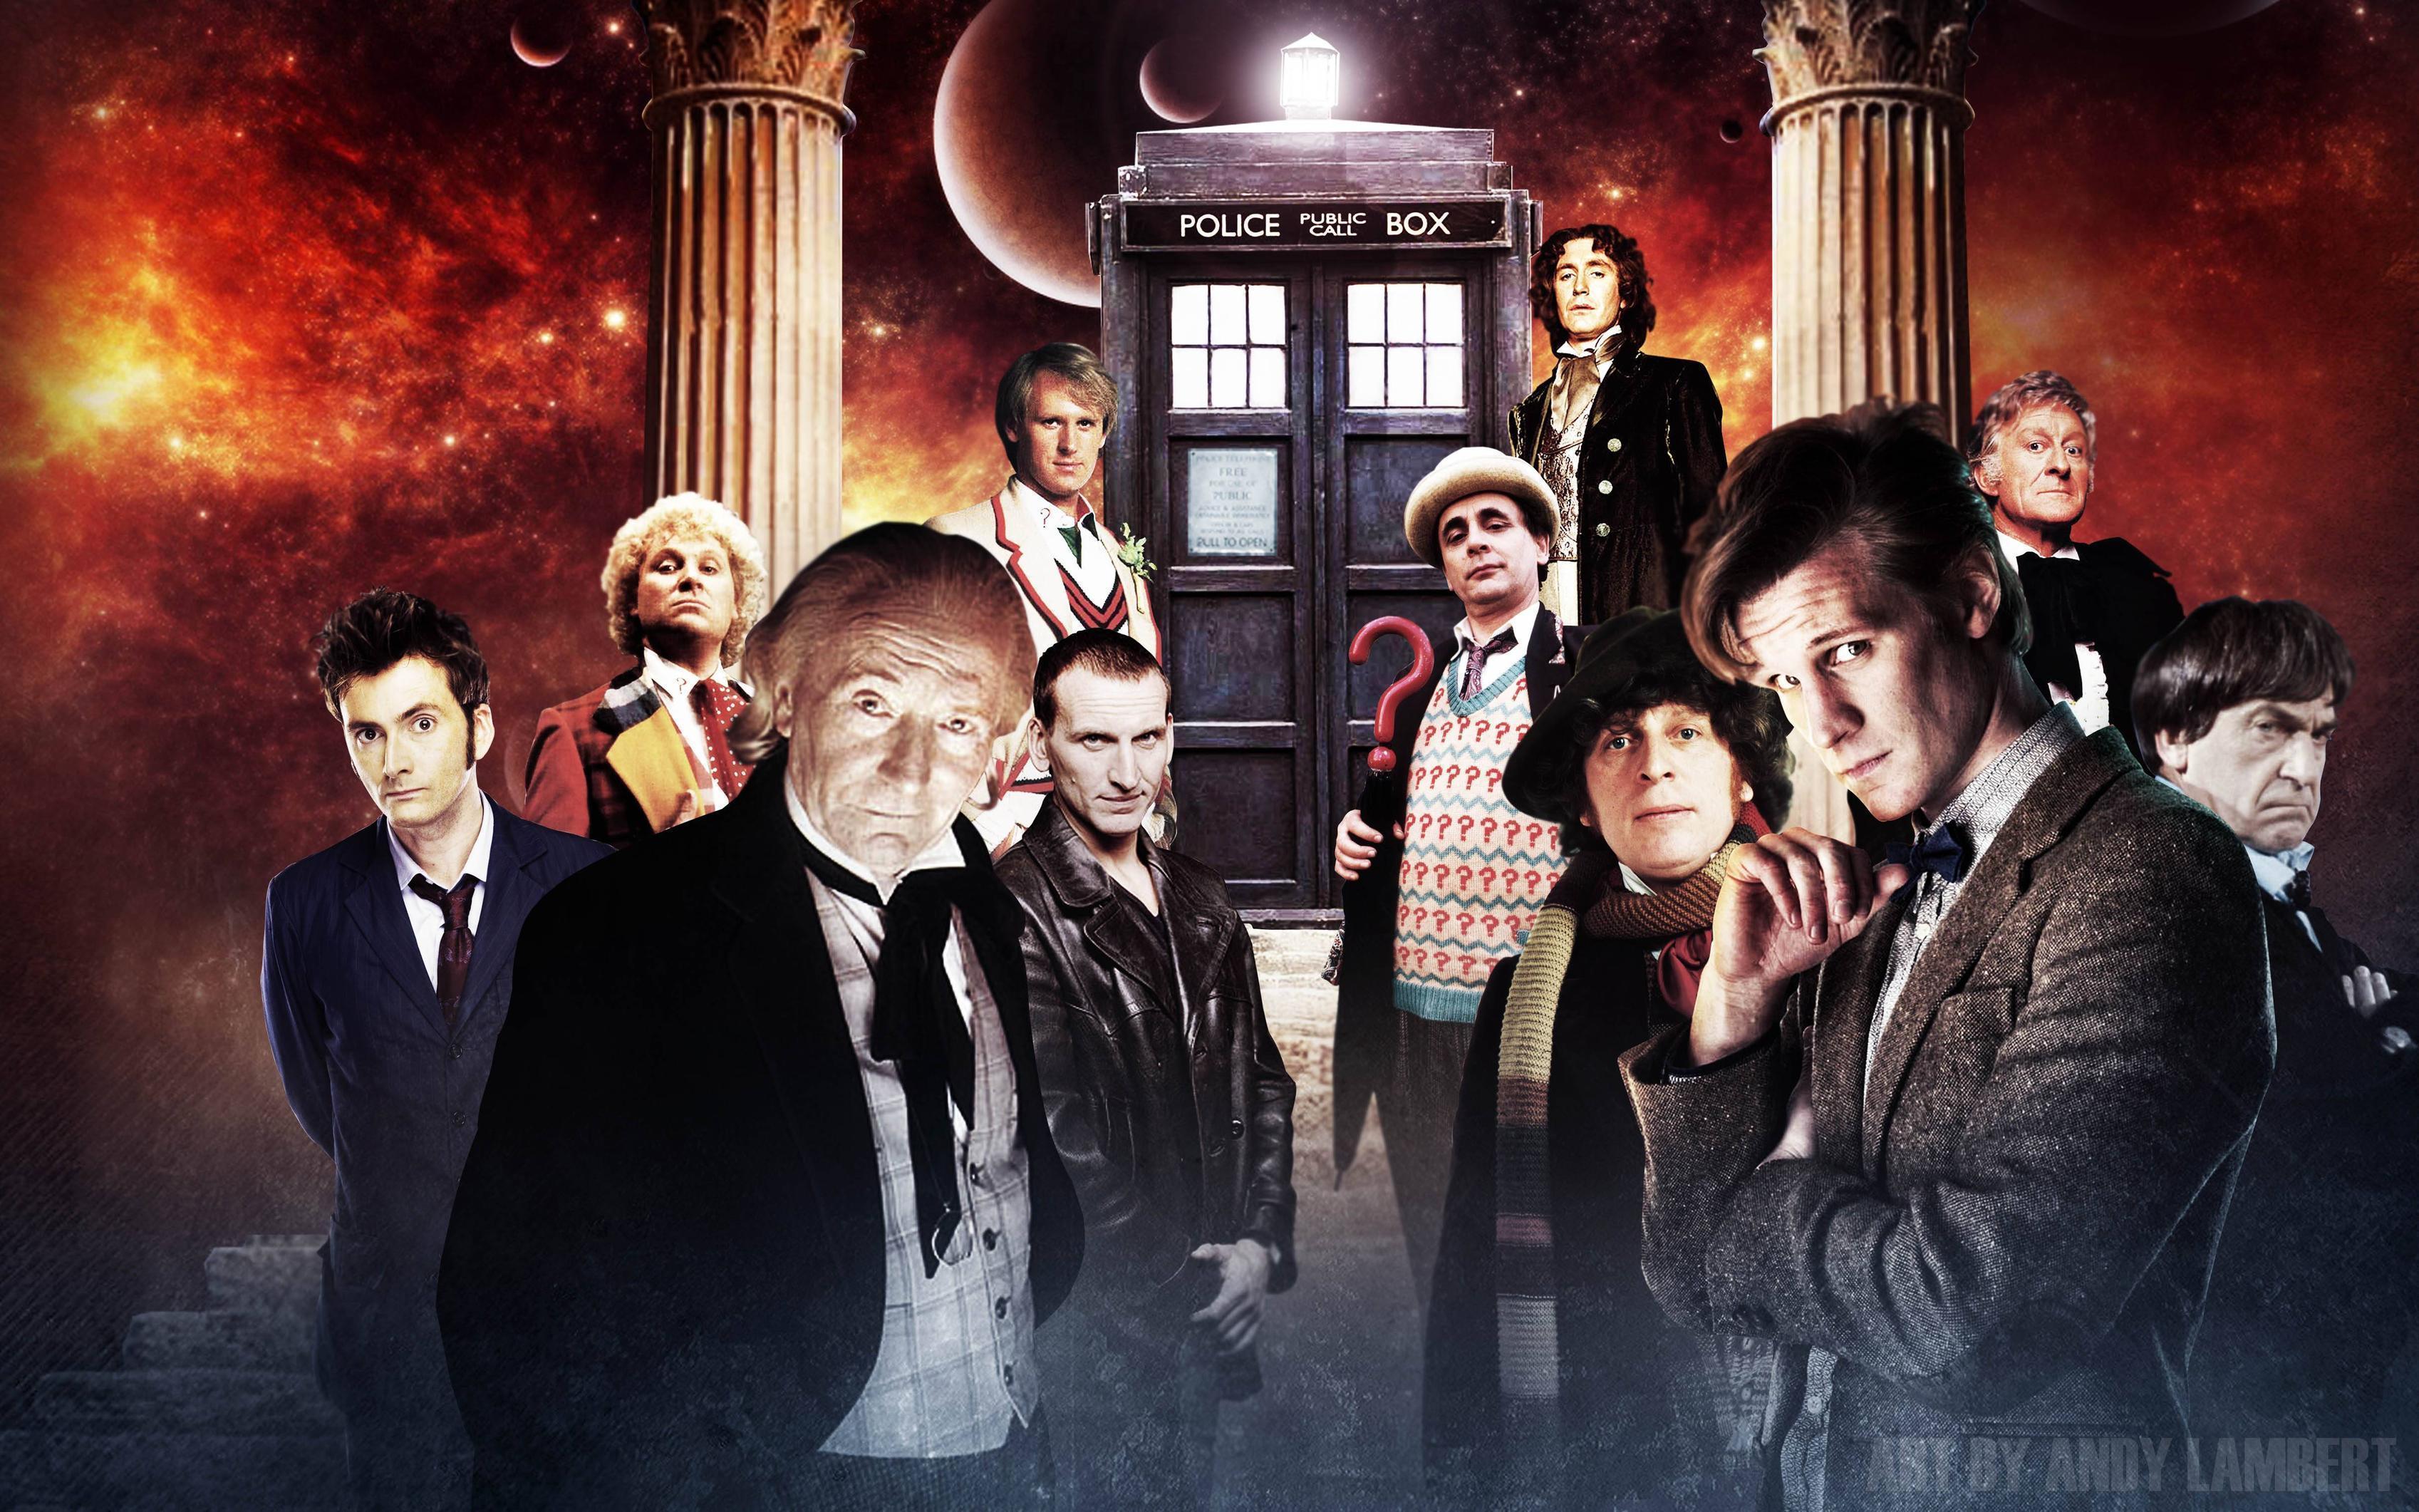 Wallpaper For > Doctor Who Wallpaper 50th Anniversary